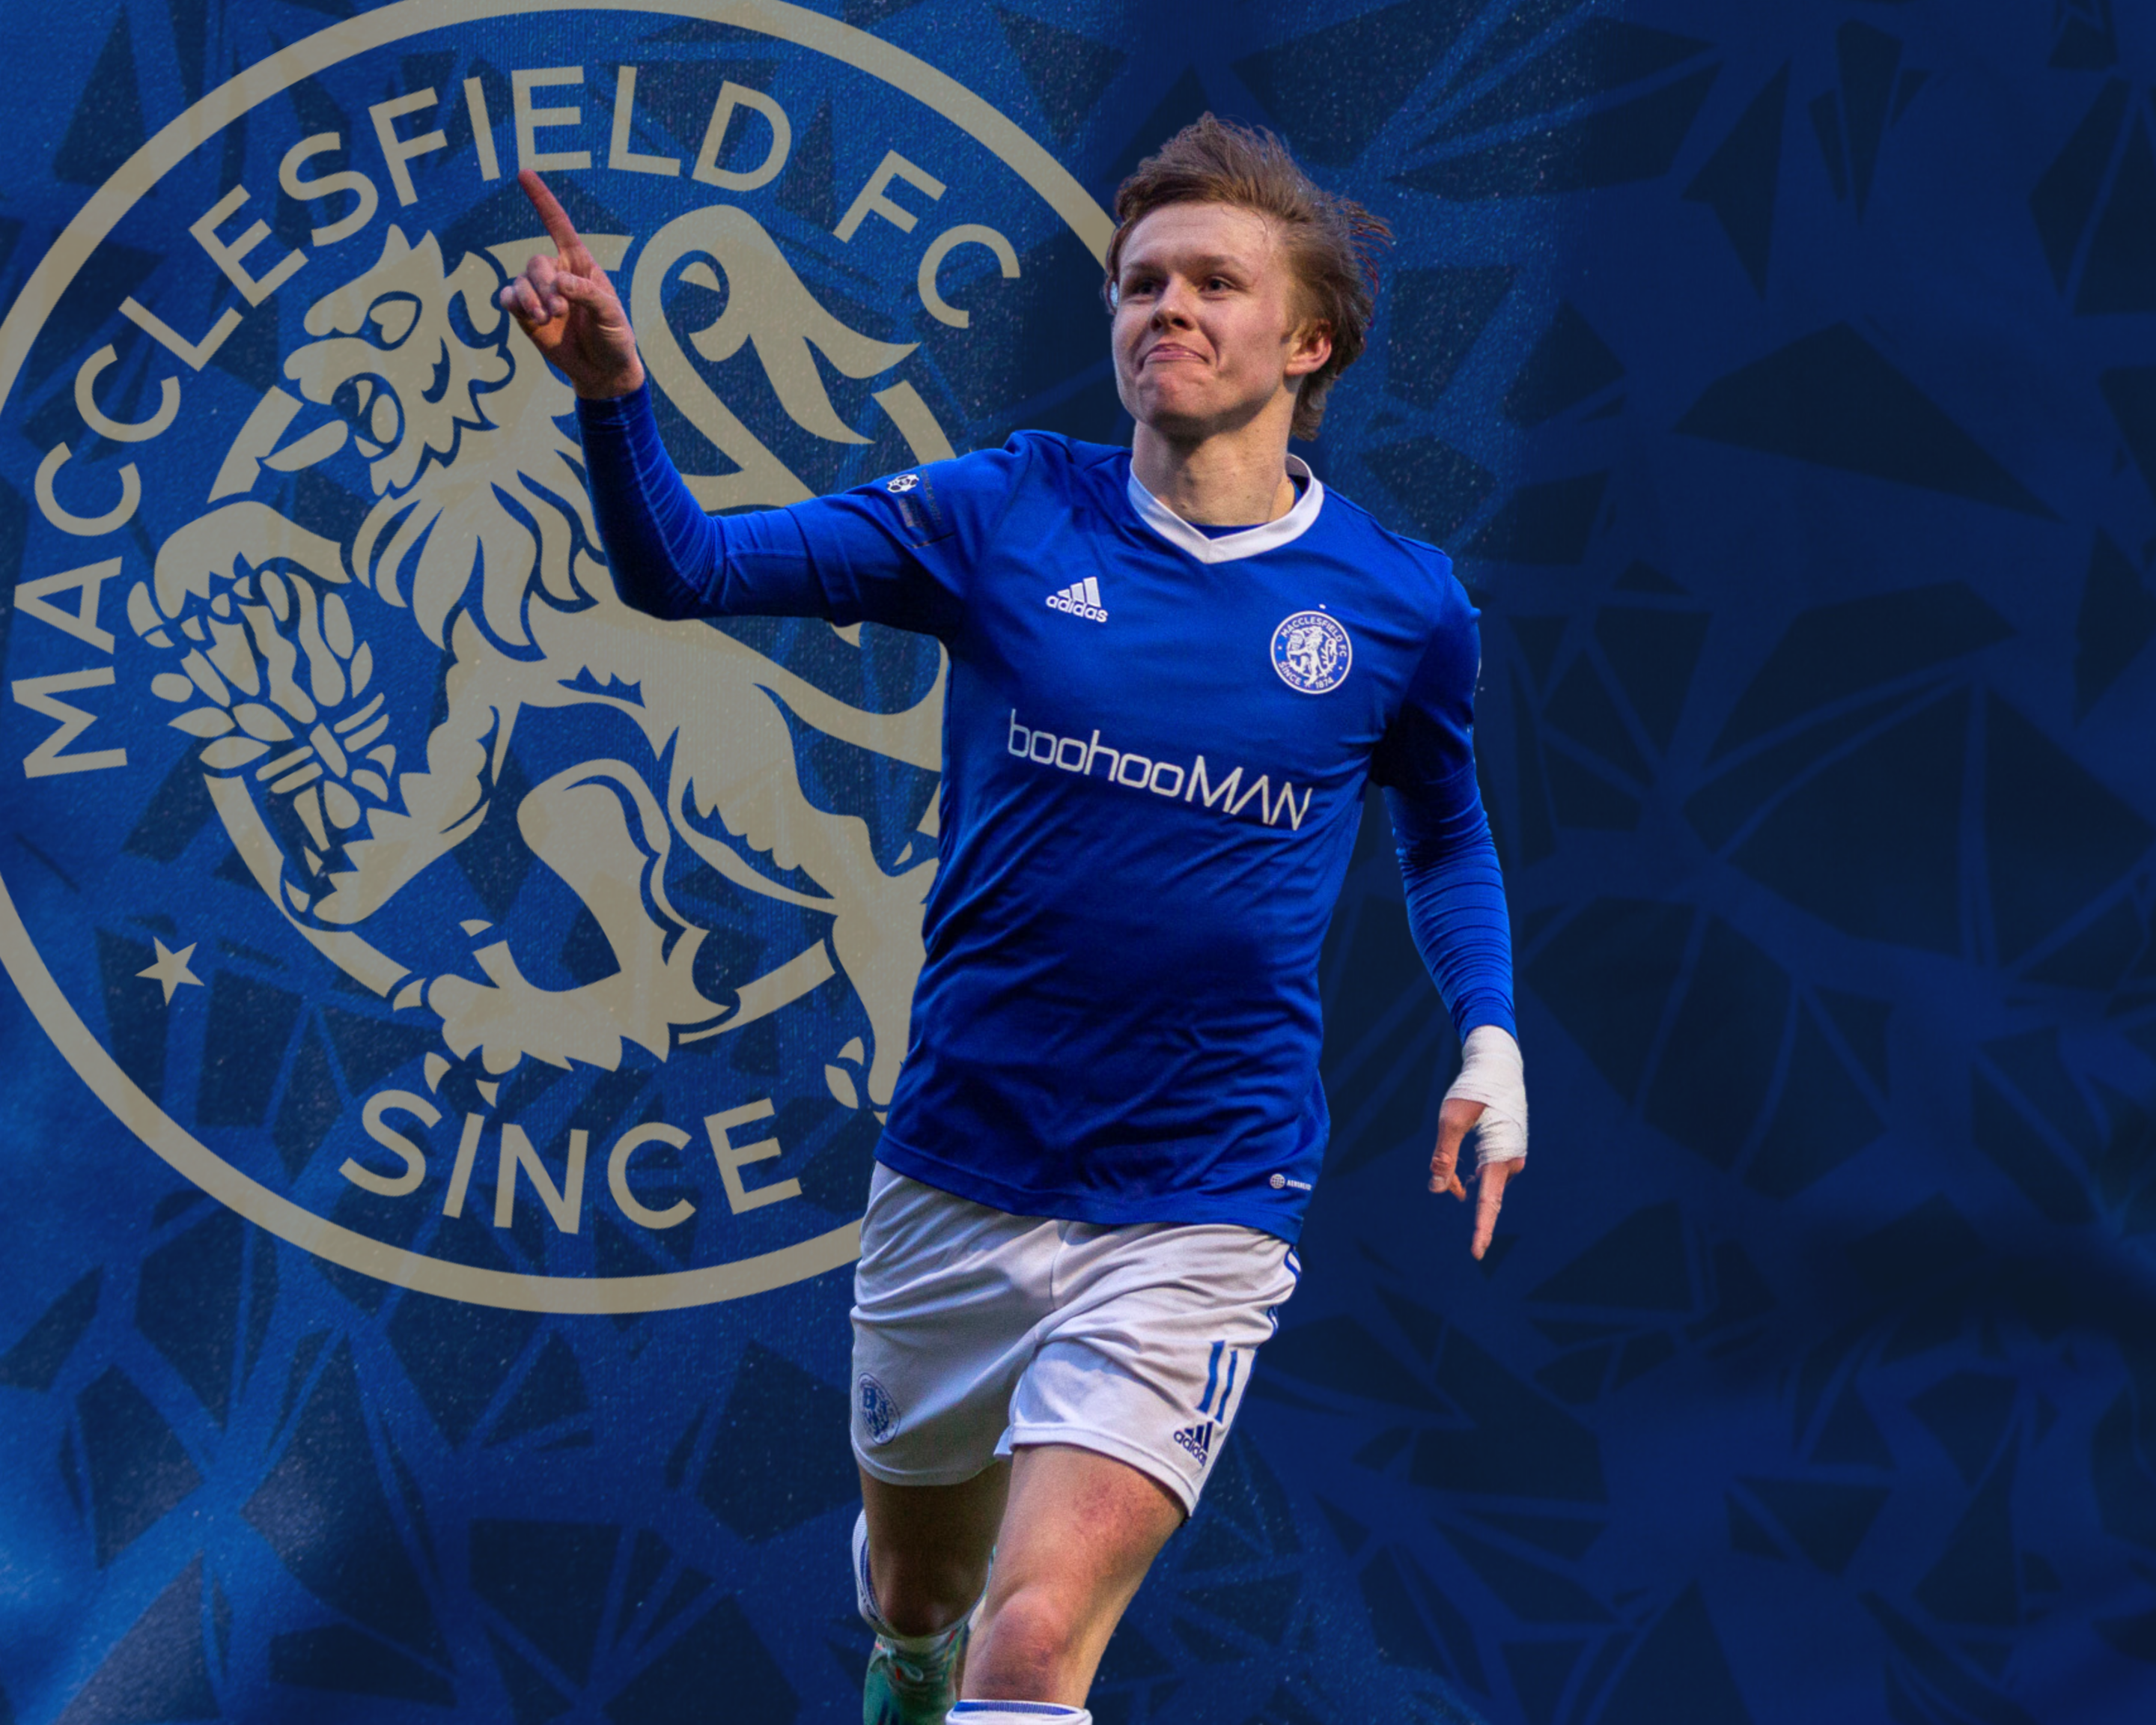 MATCH PREVIEW: MACCLESFIELD V MOSSLEY